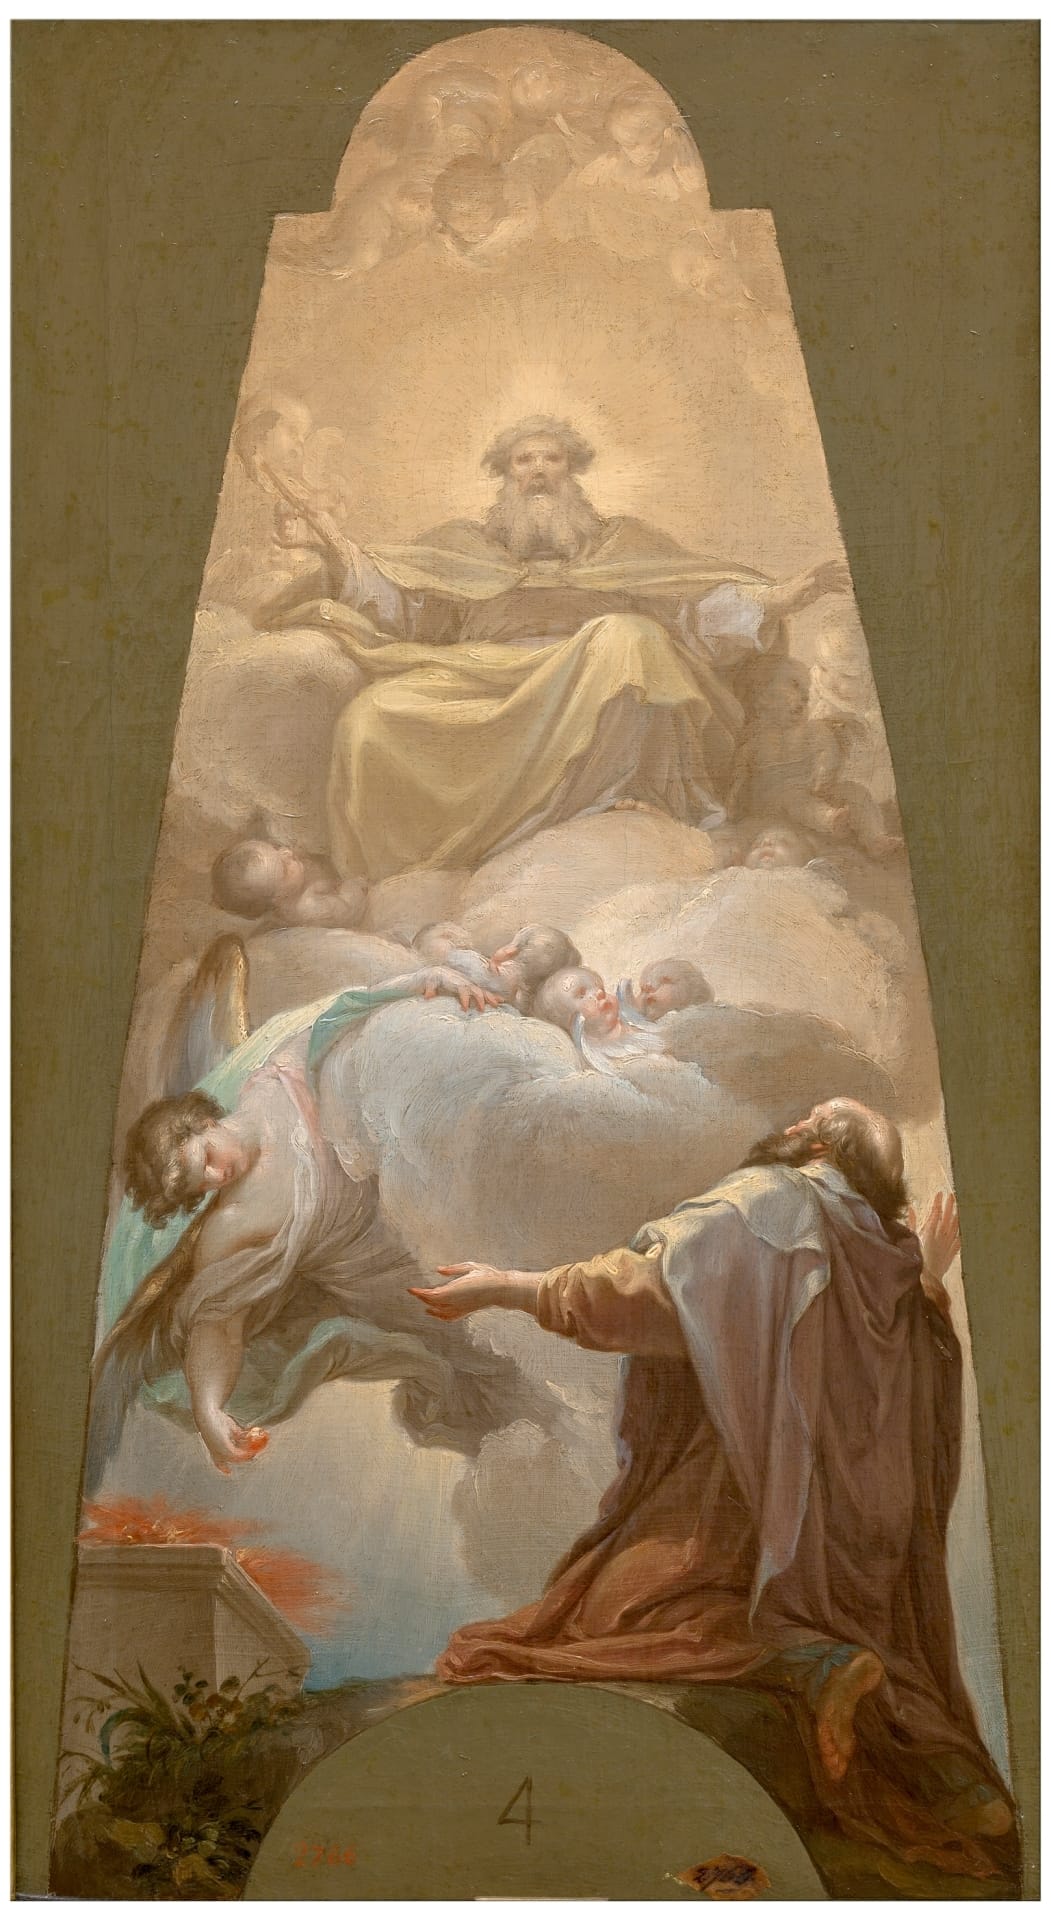 The Calling of the Prophet Isaiah (1771) by Bayeu, Francisco - Public Domain Catholic Painting